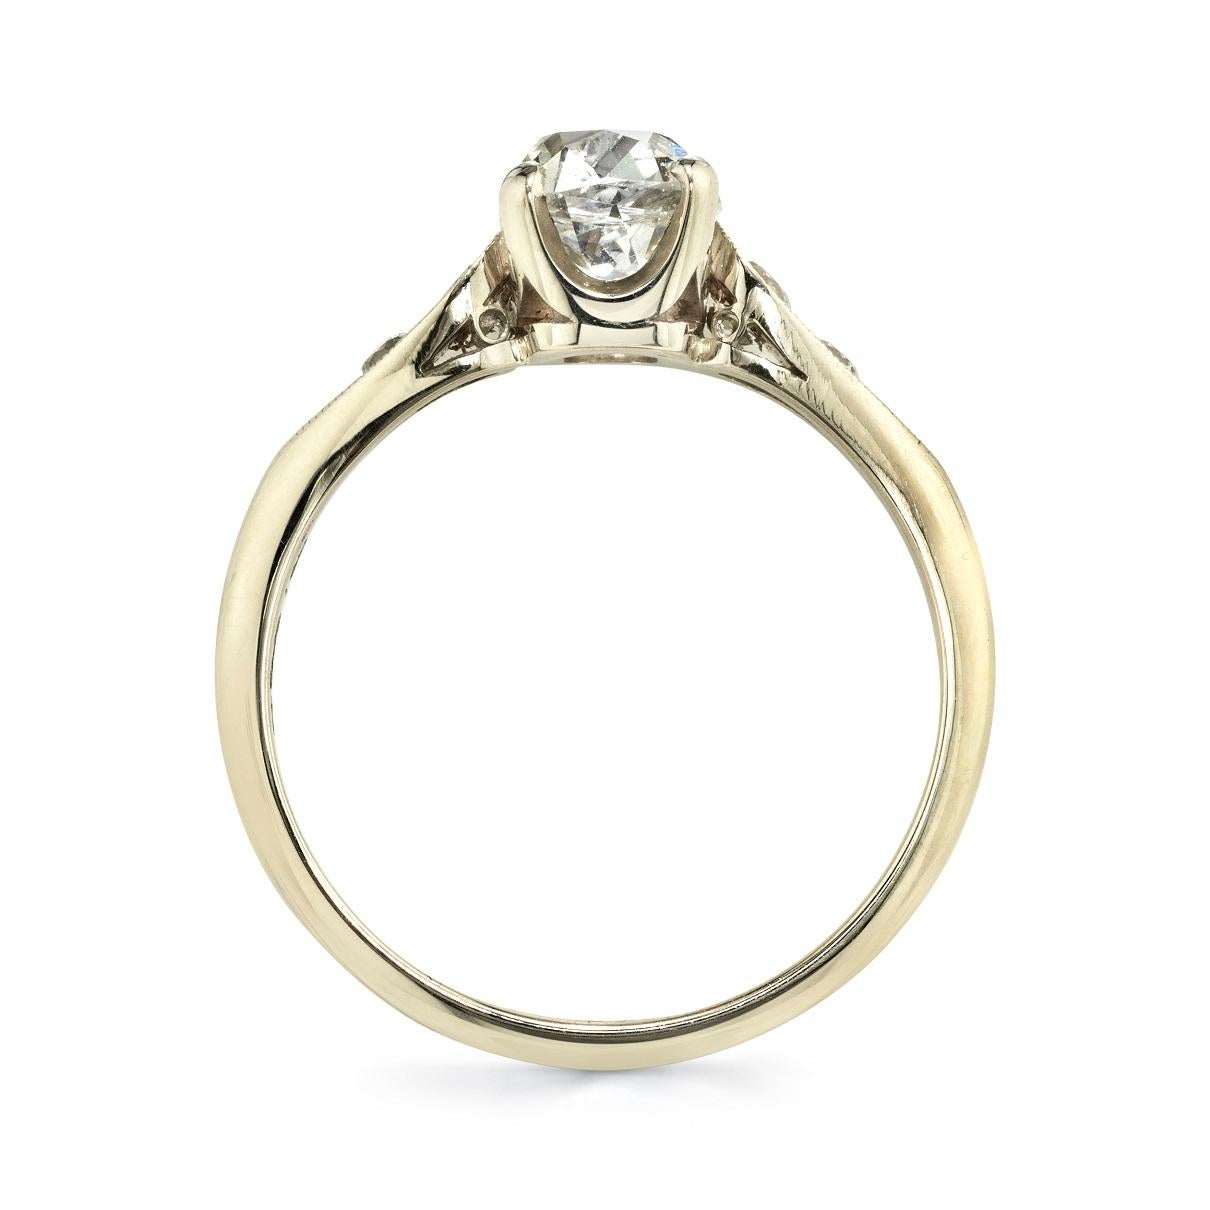 1.12ct H/VS2 EGL certified antique cushion cut diamond with 0.22ctw old European cut accent diamonds set in a handcrafted 18K champagne gold mounting.